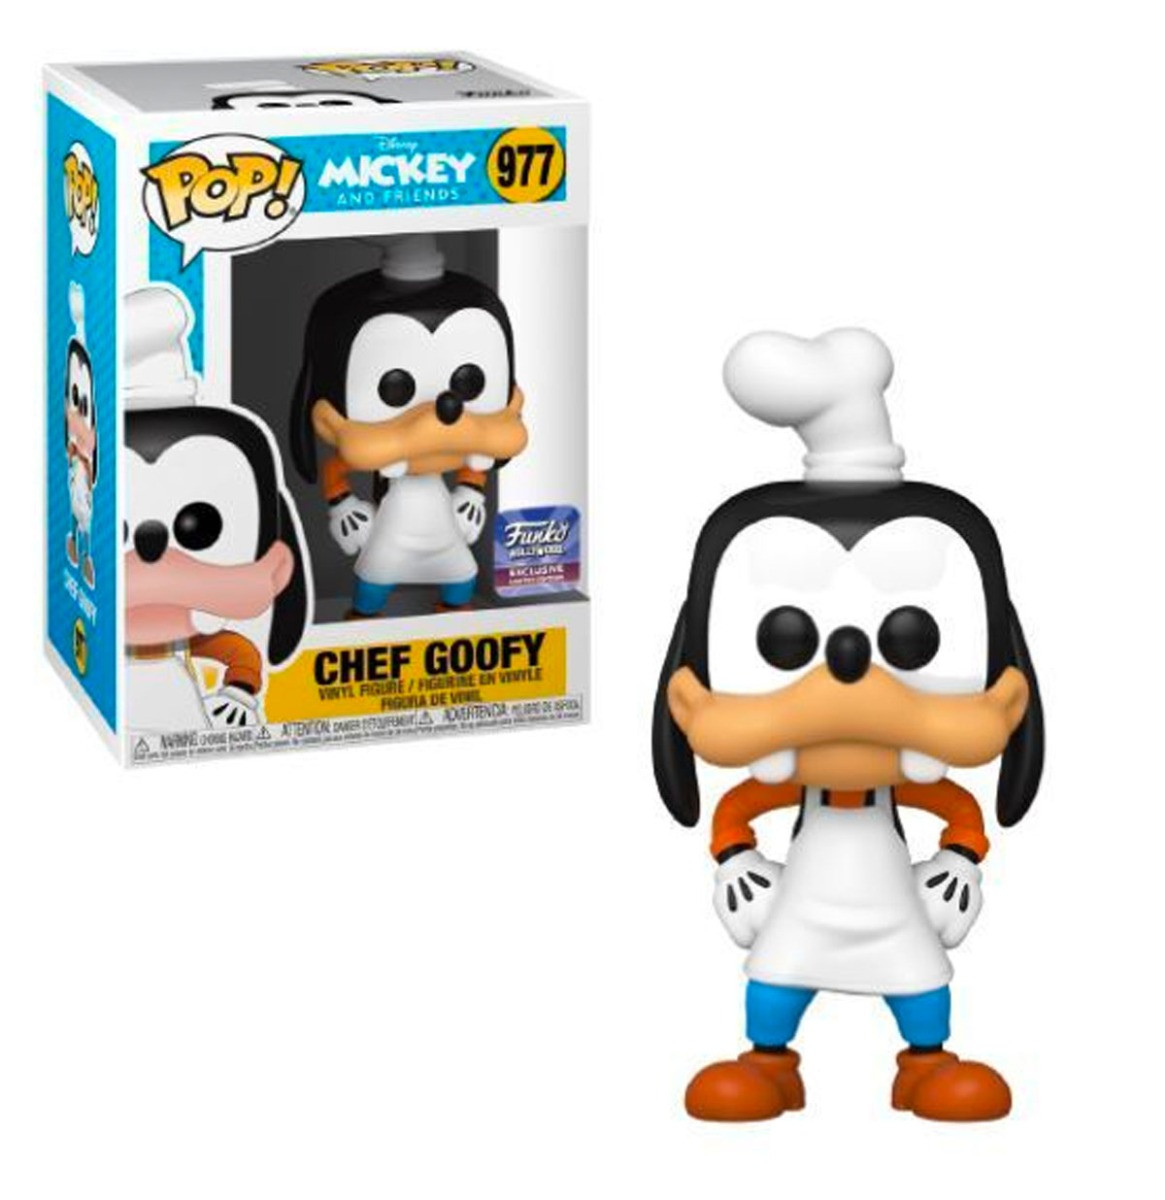 Funko Pop! Disney: Mickey And Friends - Chef Goofy Hollywood Store Exclusive